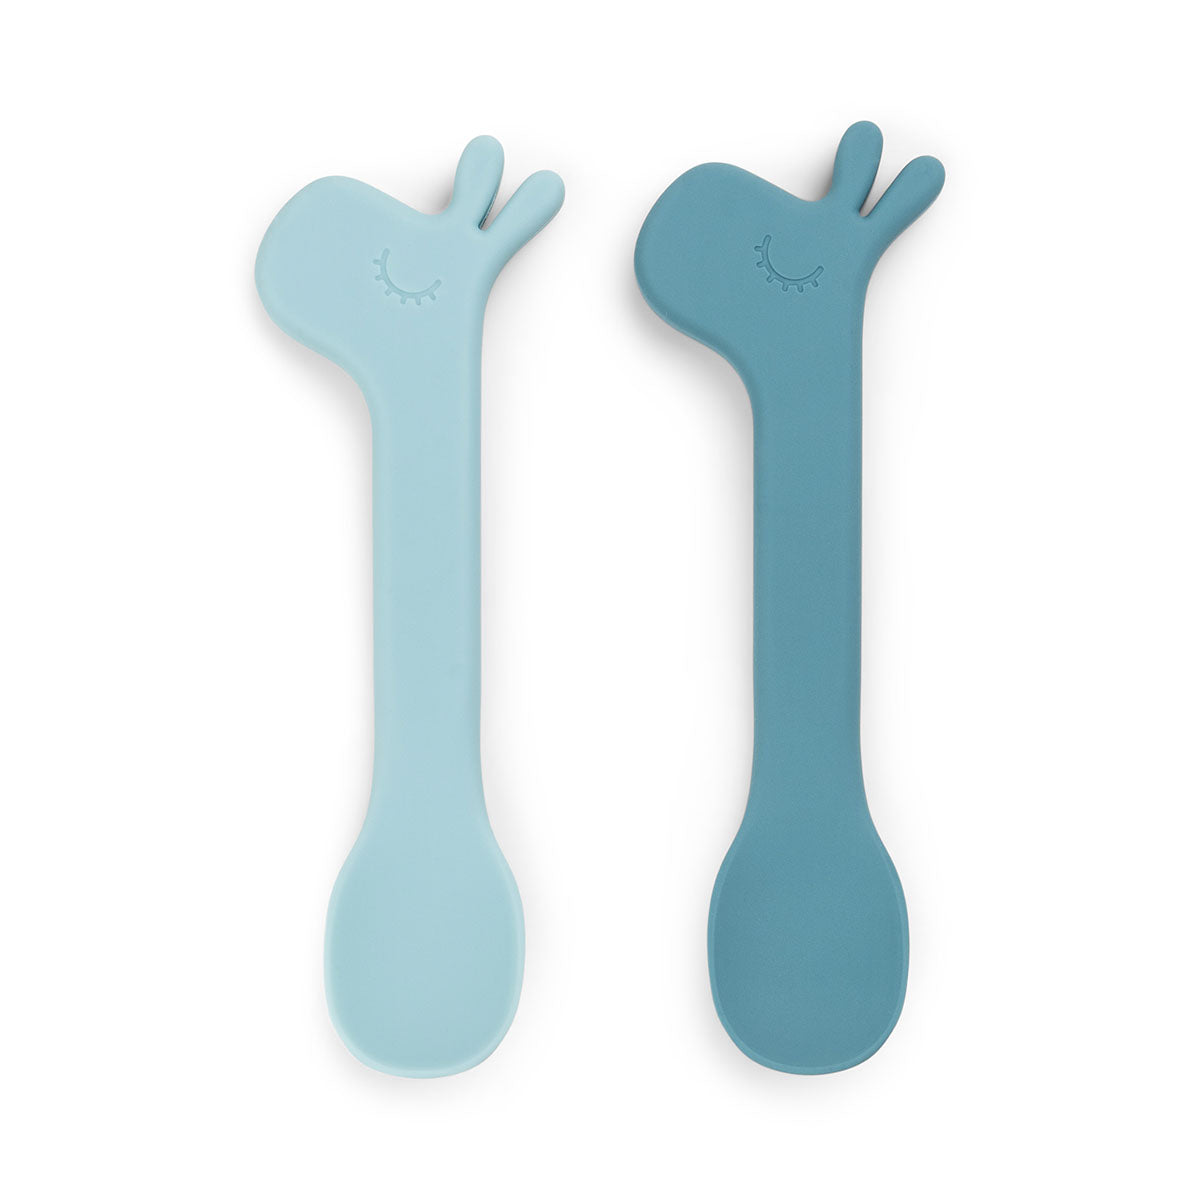 Silicone spoon 2-pack - Lalee - Blue